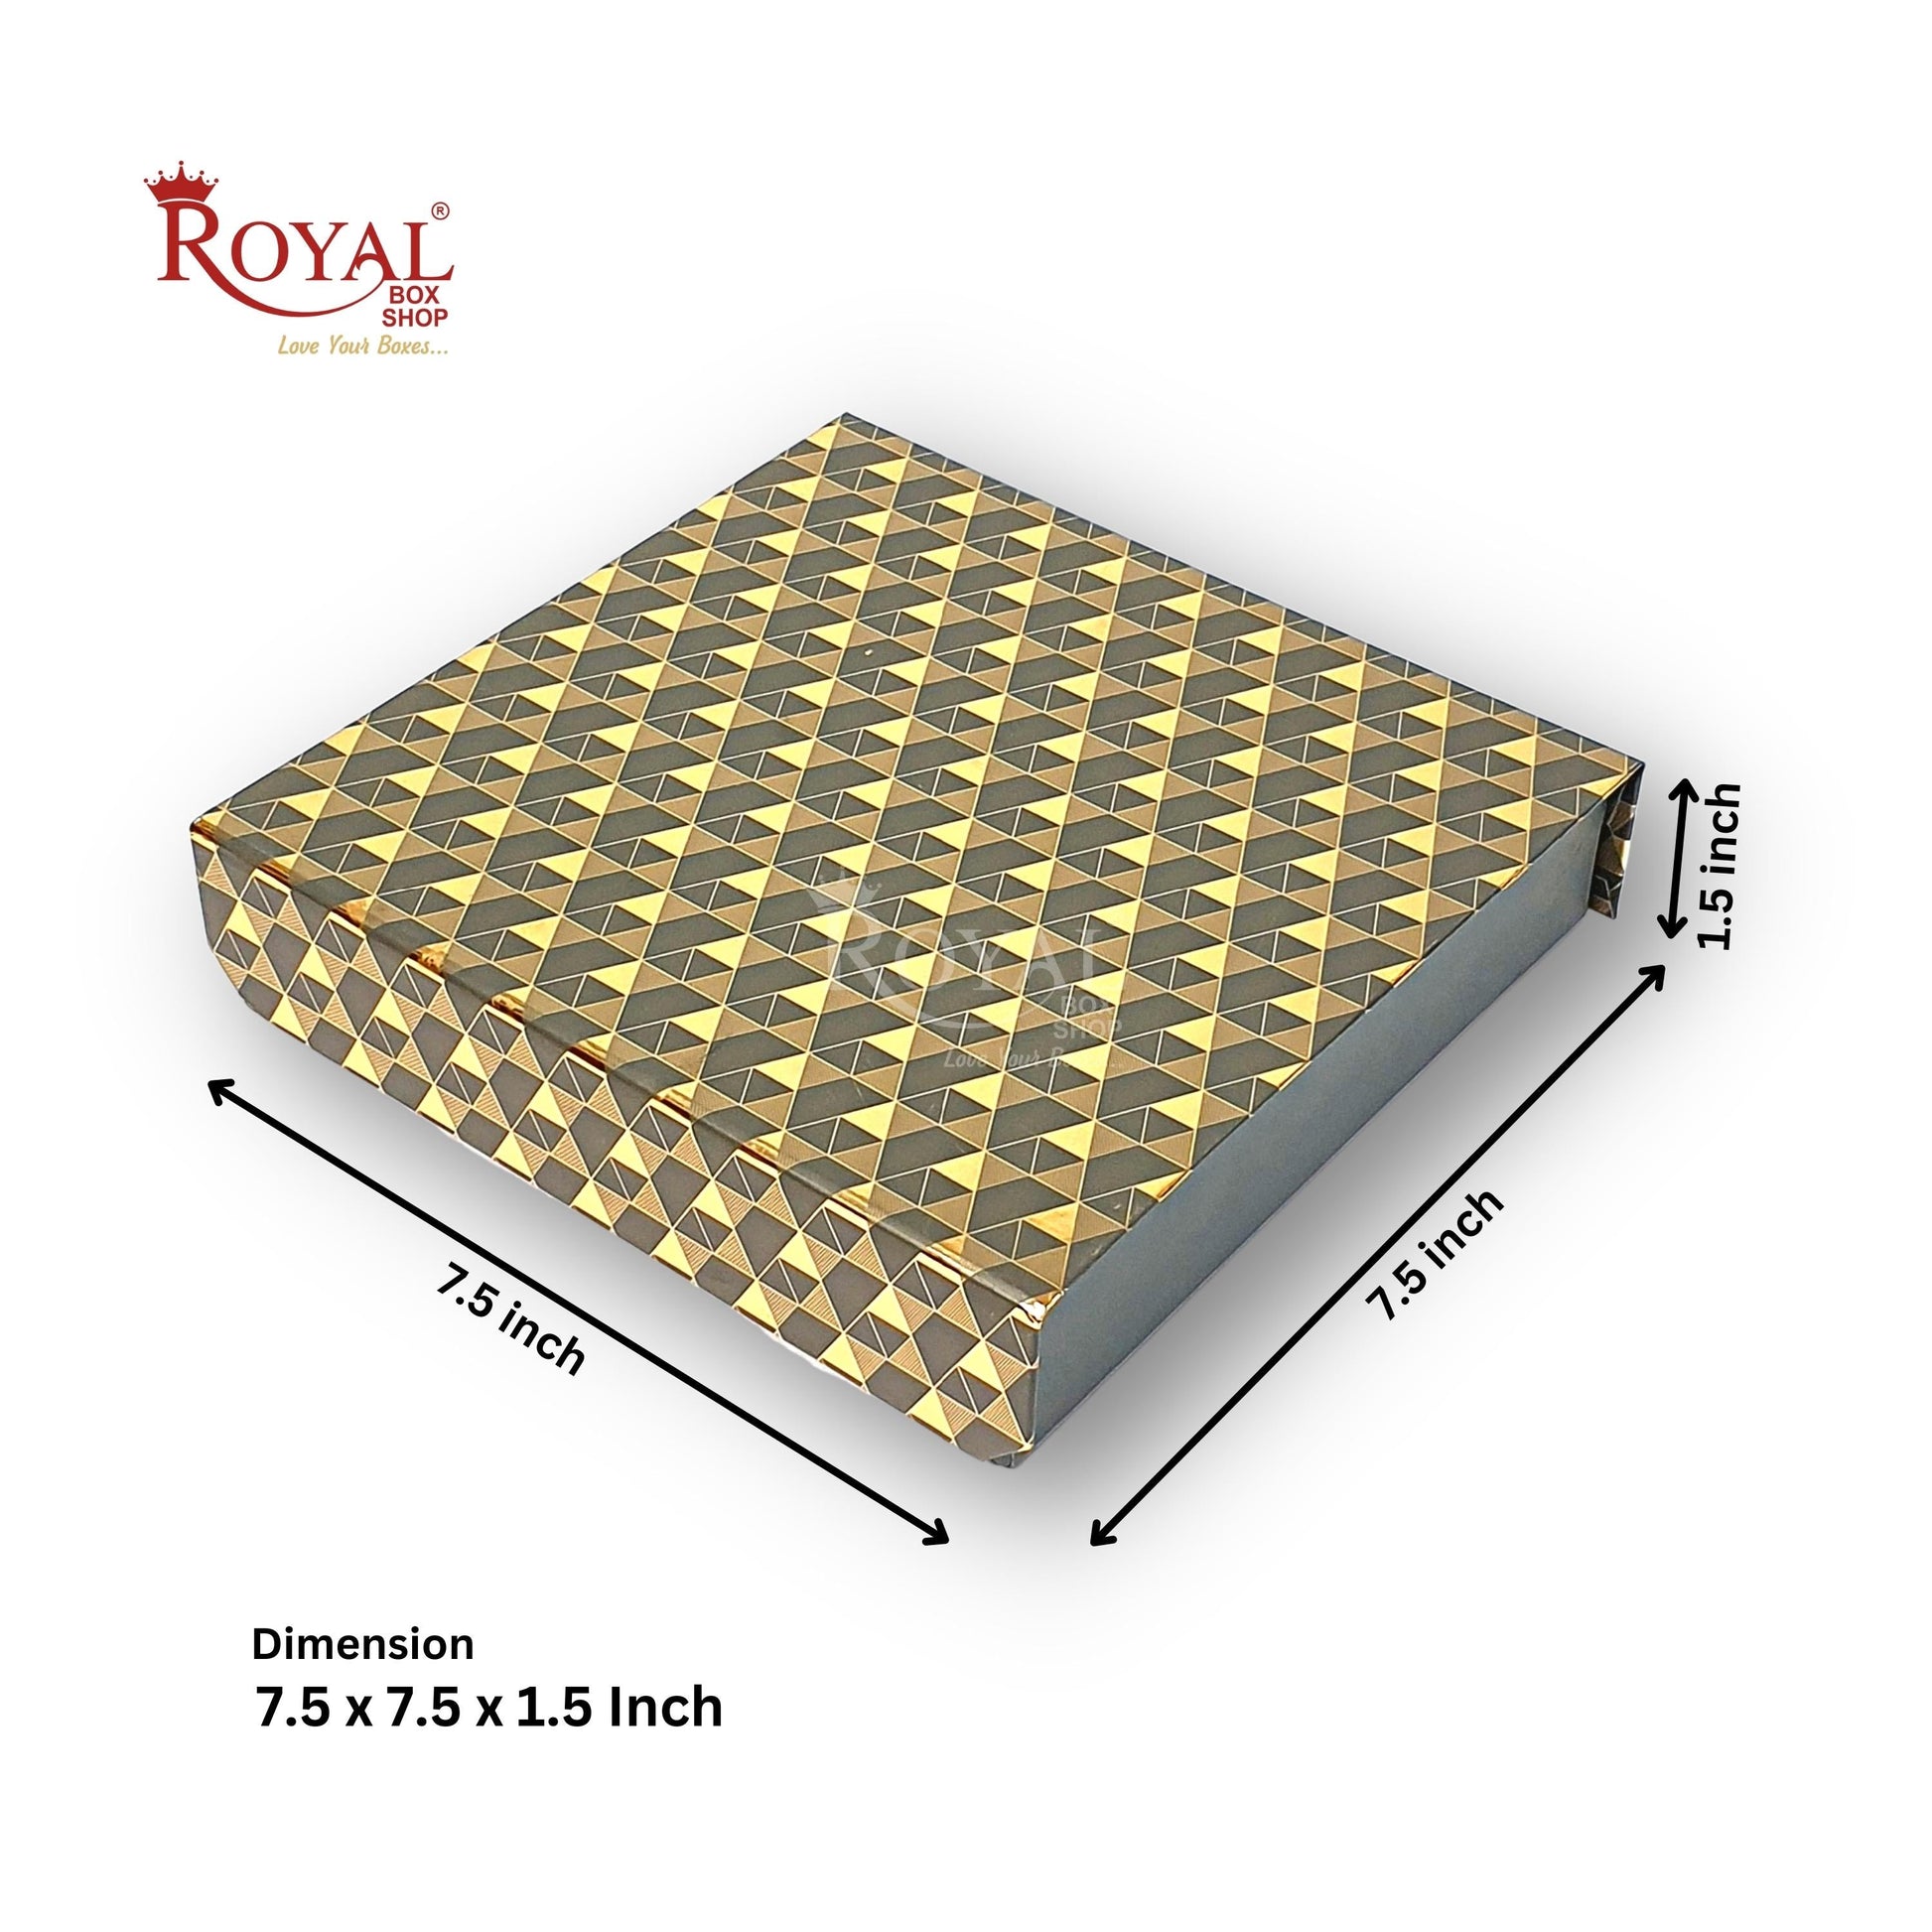 Rigid Chocolate Boxes 16 Cavity With Magnetic Flap I Grey with Gold Foiling I 7.5 X 7.5 X 1.5 Inch I Kappa Boxes Royal Box Shop